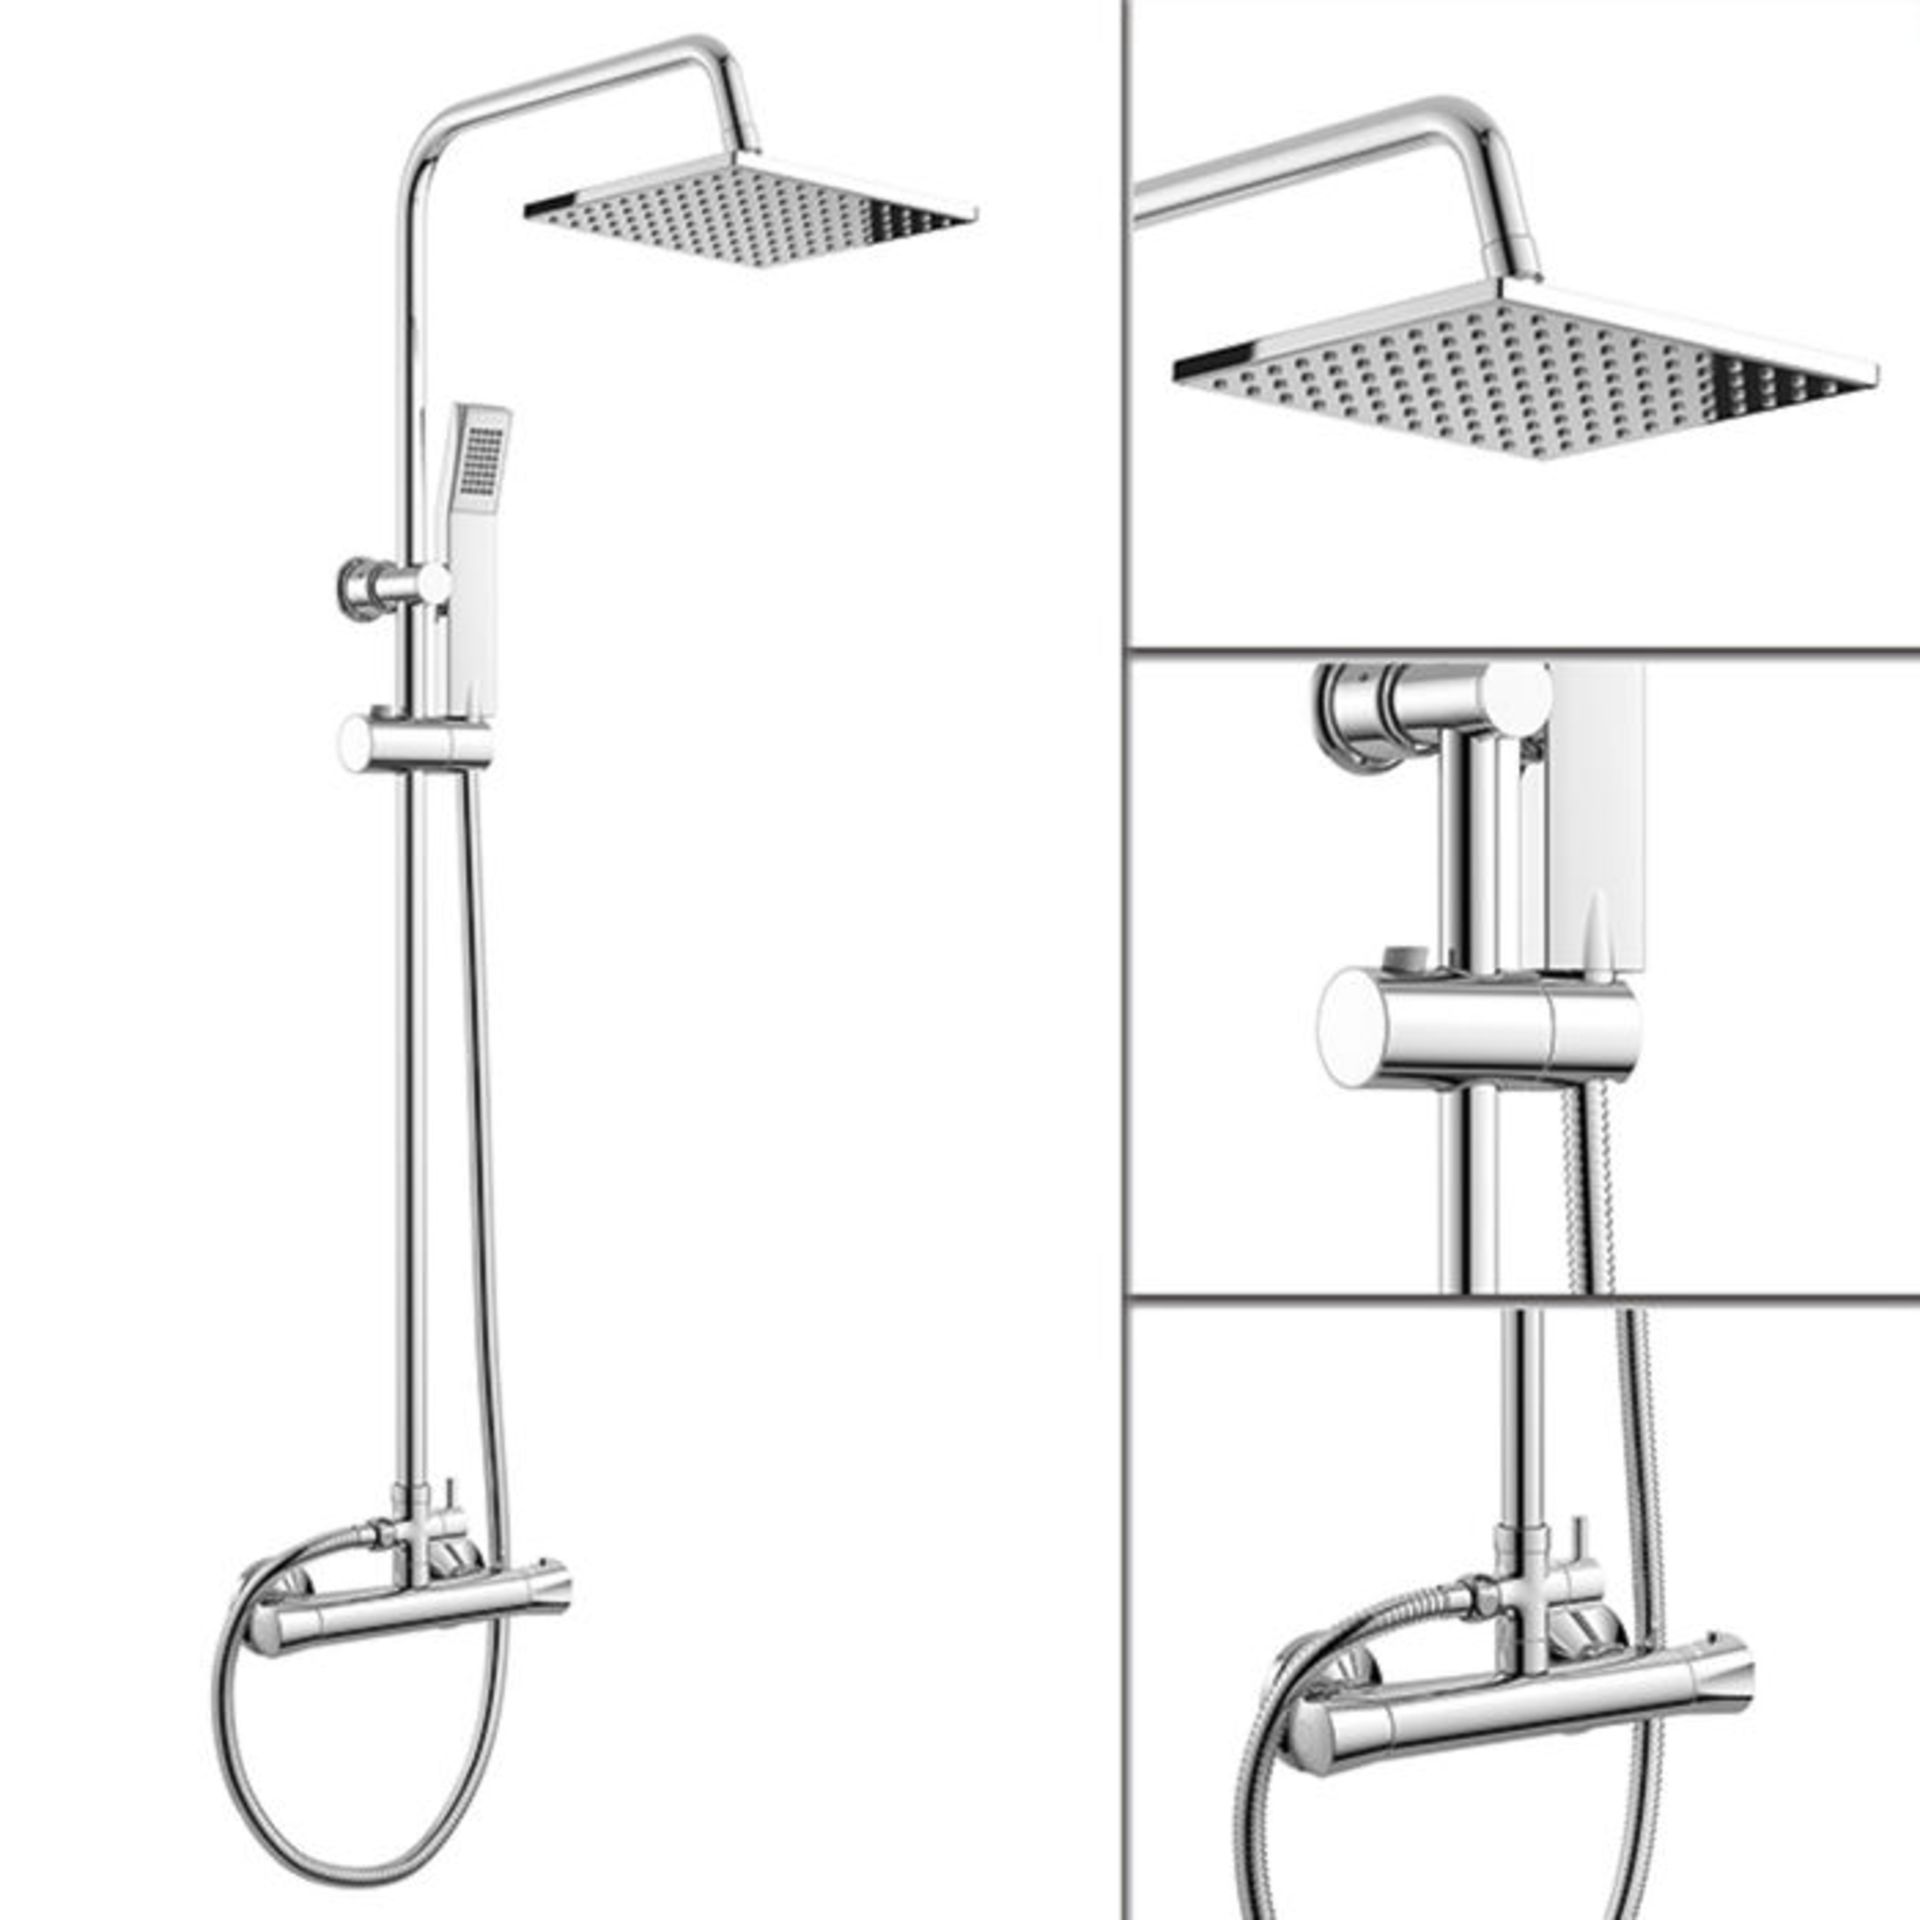 Square Exposed Thermostatic Shower Kit & Head. Curved features and contemporary rounded valves... - Image 2 of 2